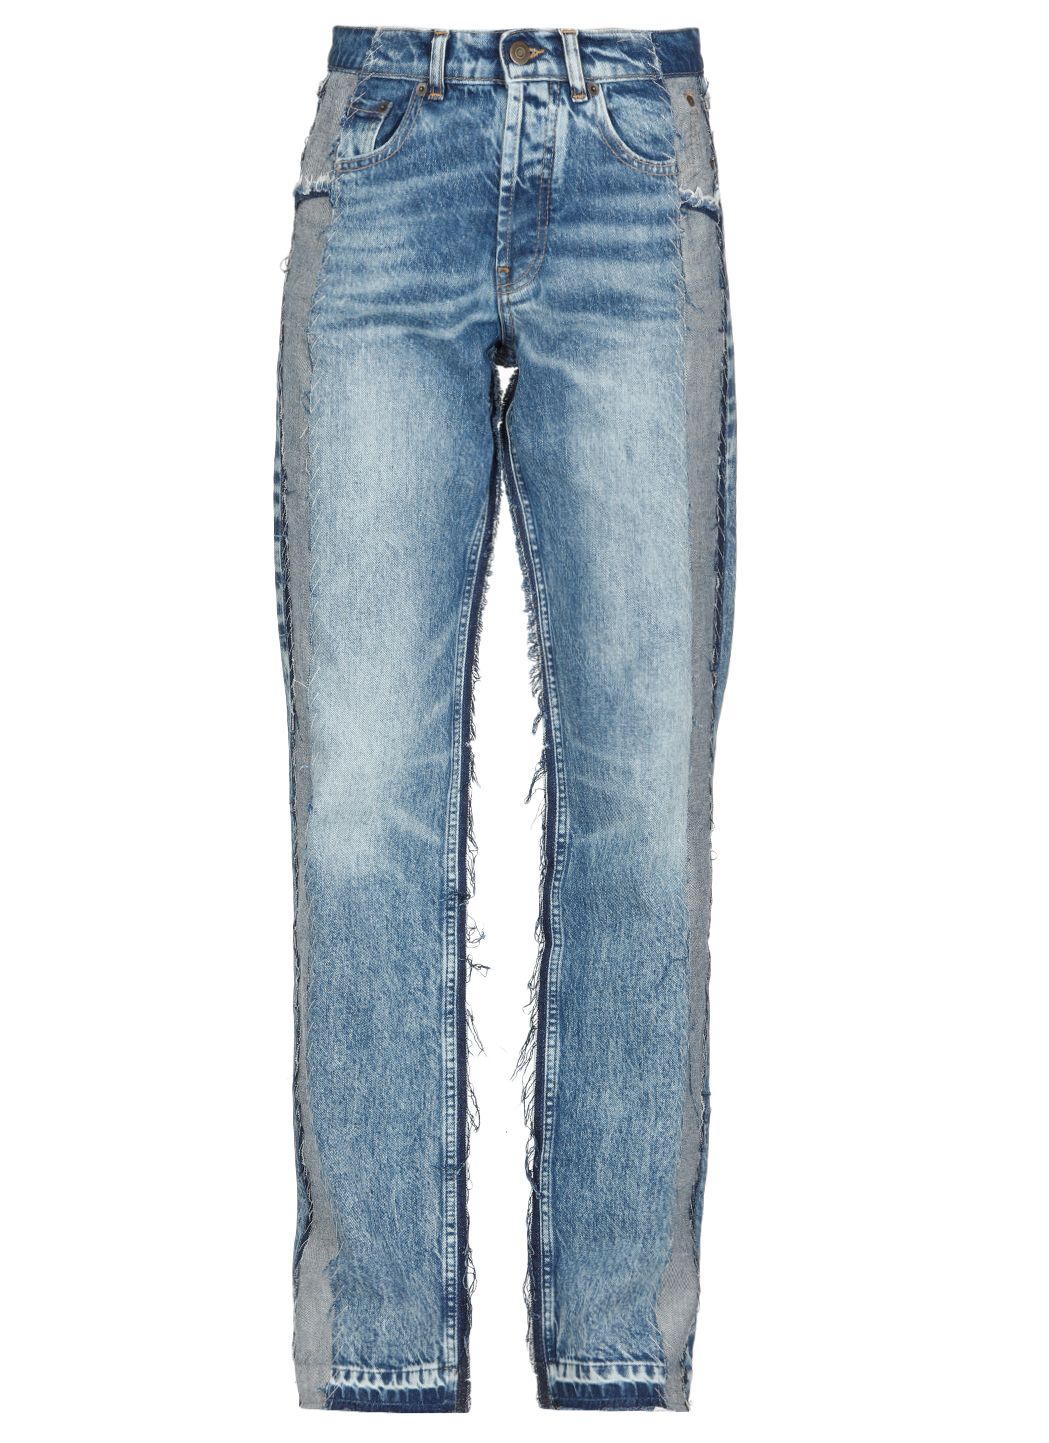 Spliced Recycled jeans